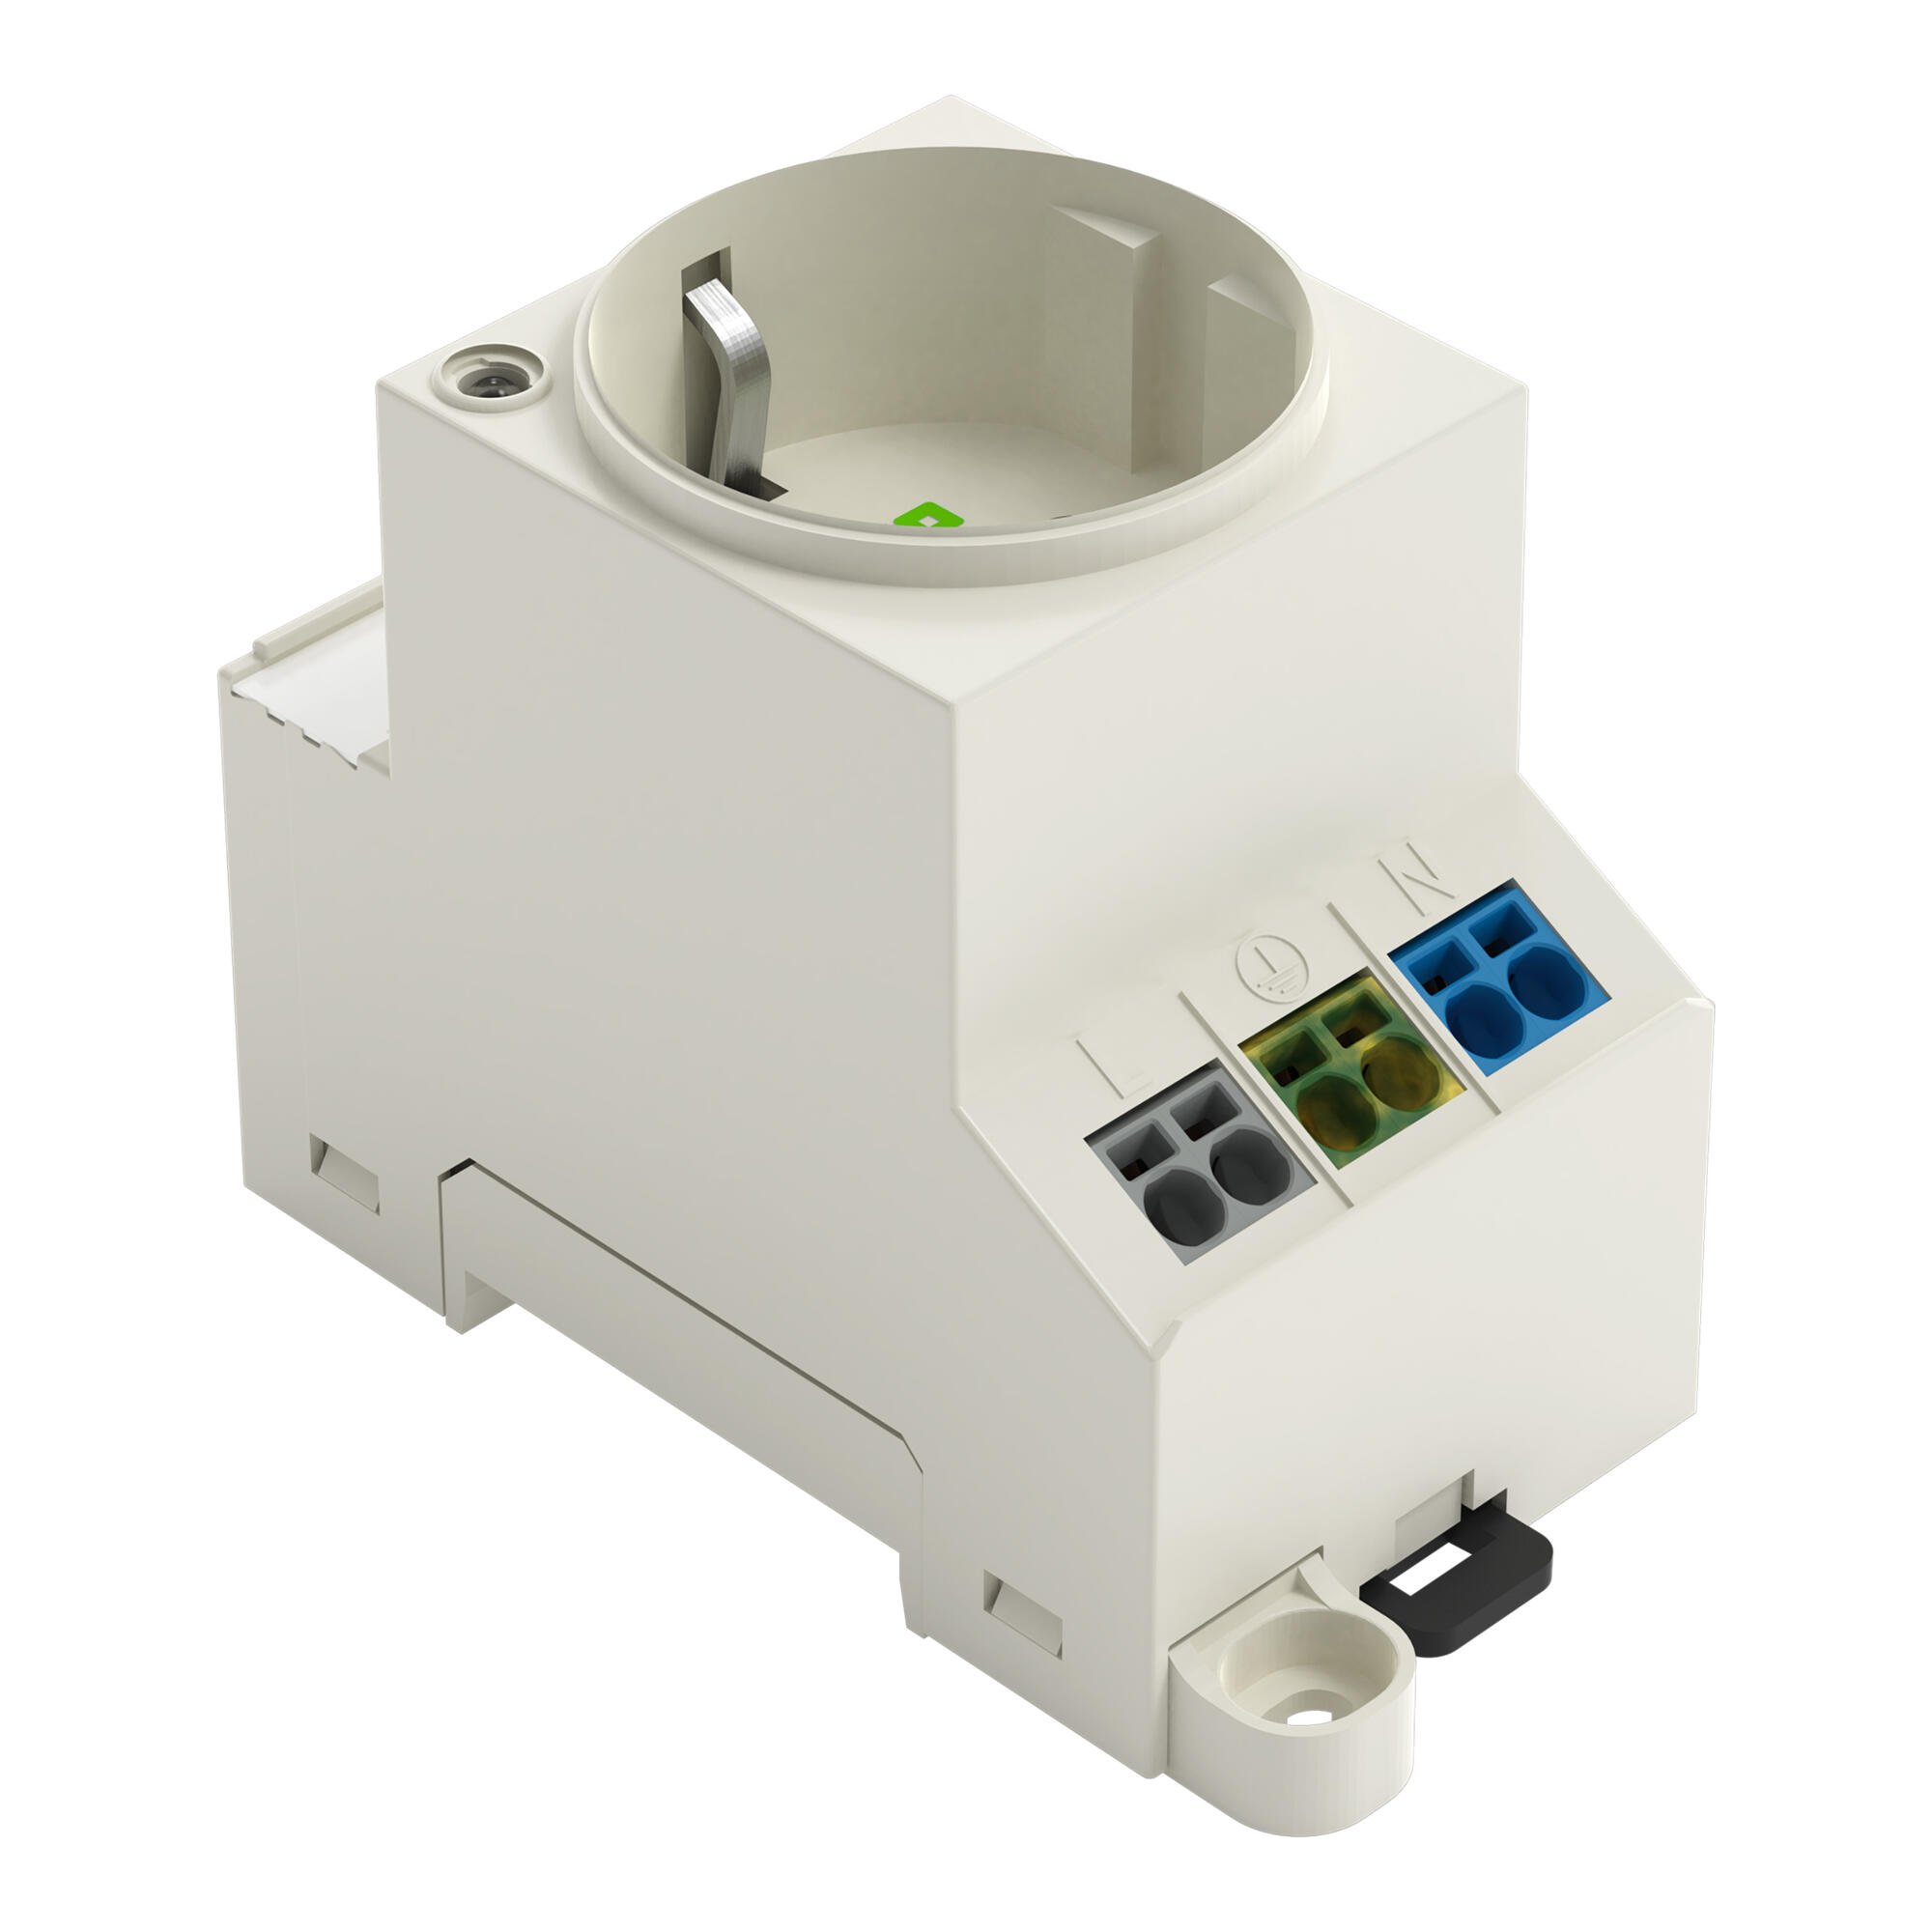 Switchgear cabinet outlet; for DIN-rail and screw mounting; for plug, type F, CEE 7/4 (Schuko); common in DE, NL, AT; with LED status indicator; with Push-in Cage Clamp double connection; light gray